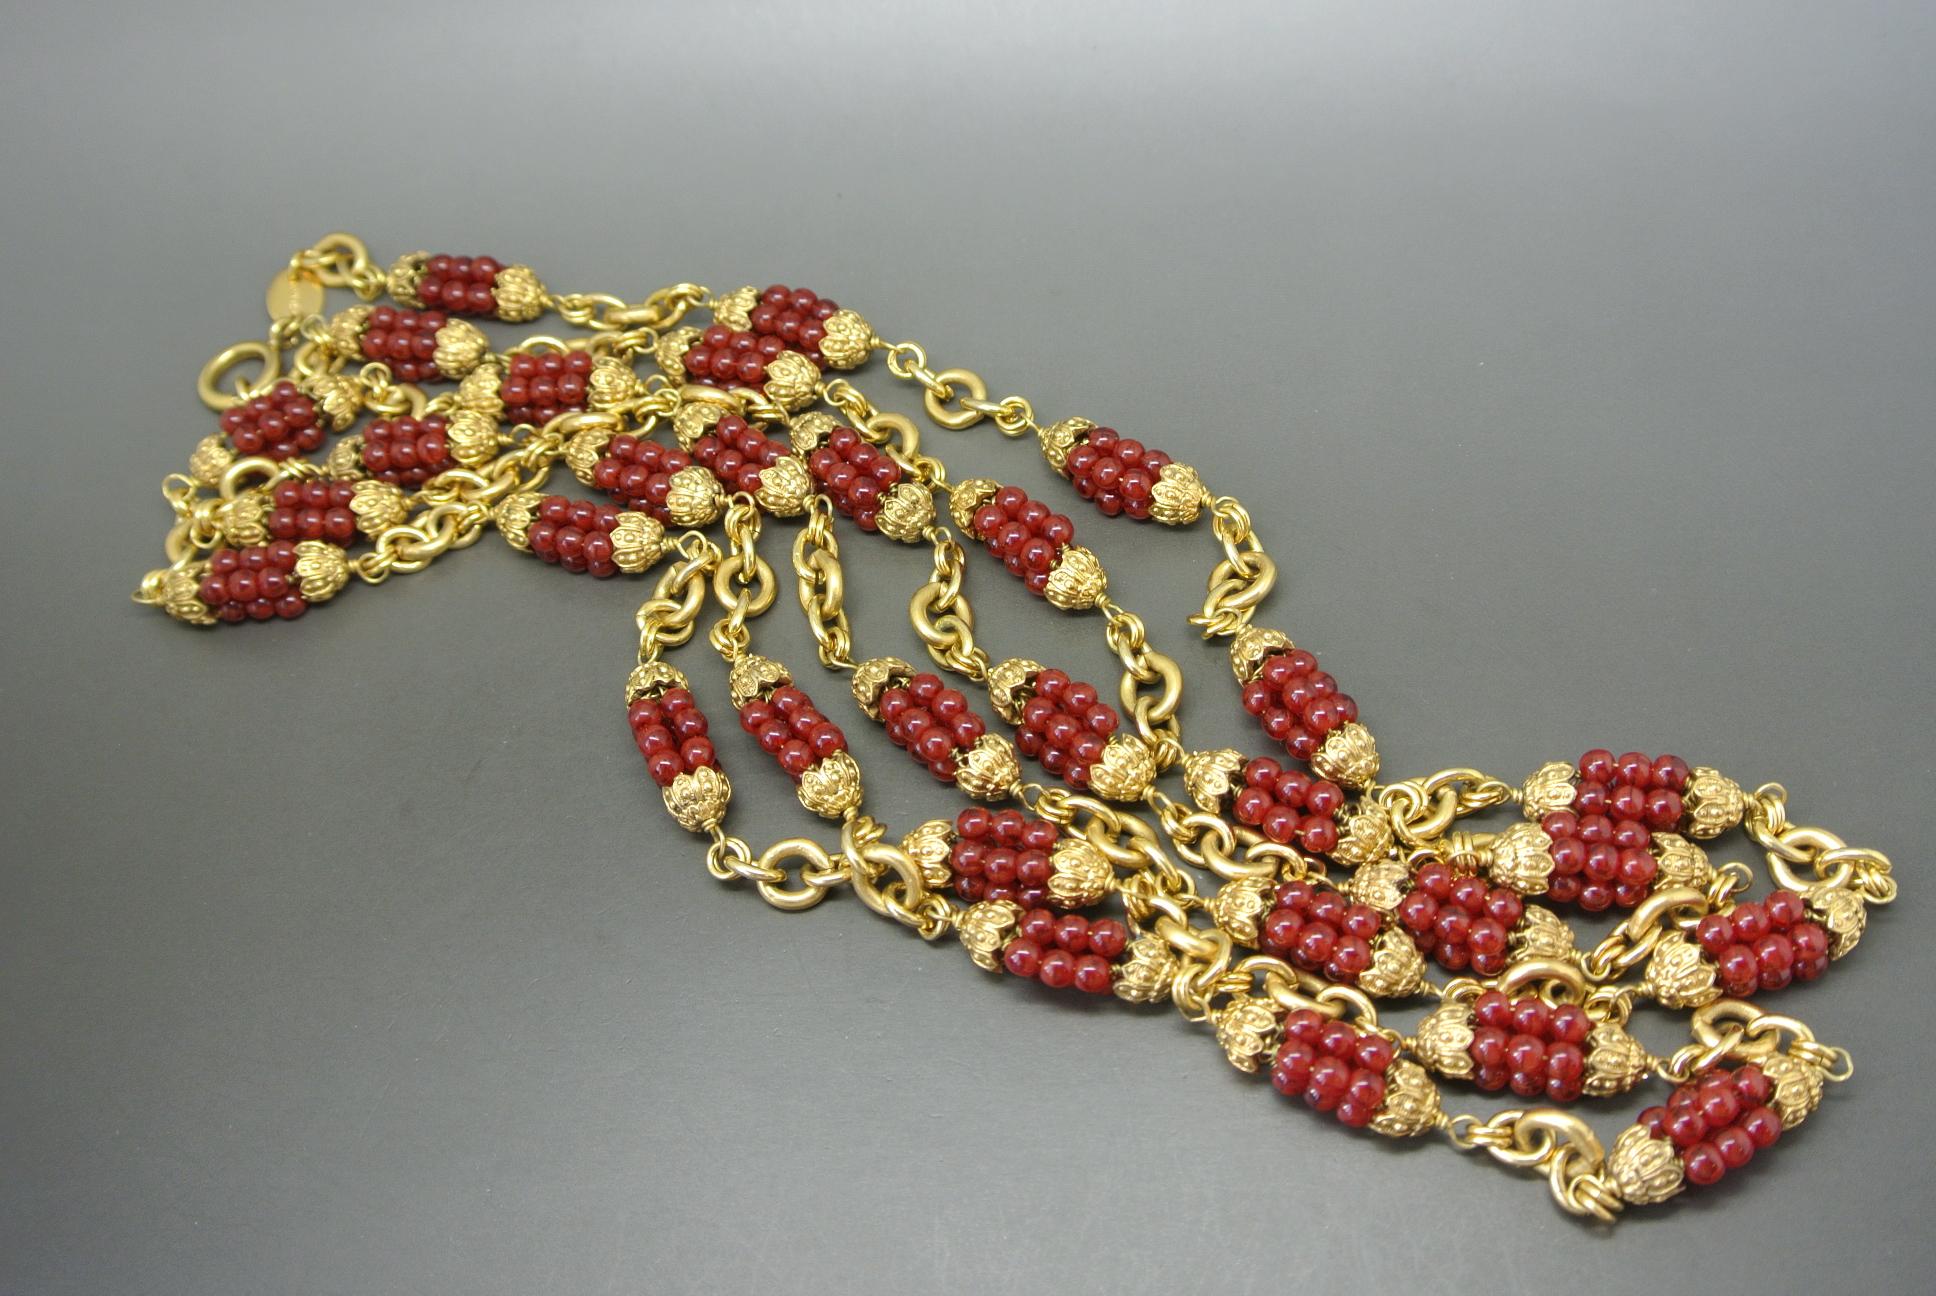 Chanel Necklace
Signed and dated 60s
Designed by Robert Goossens